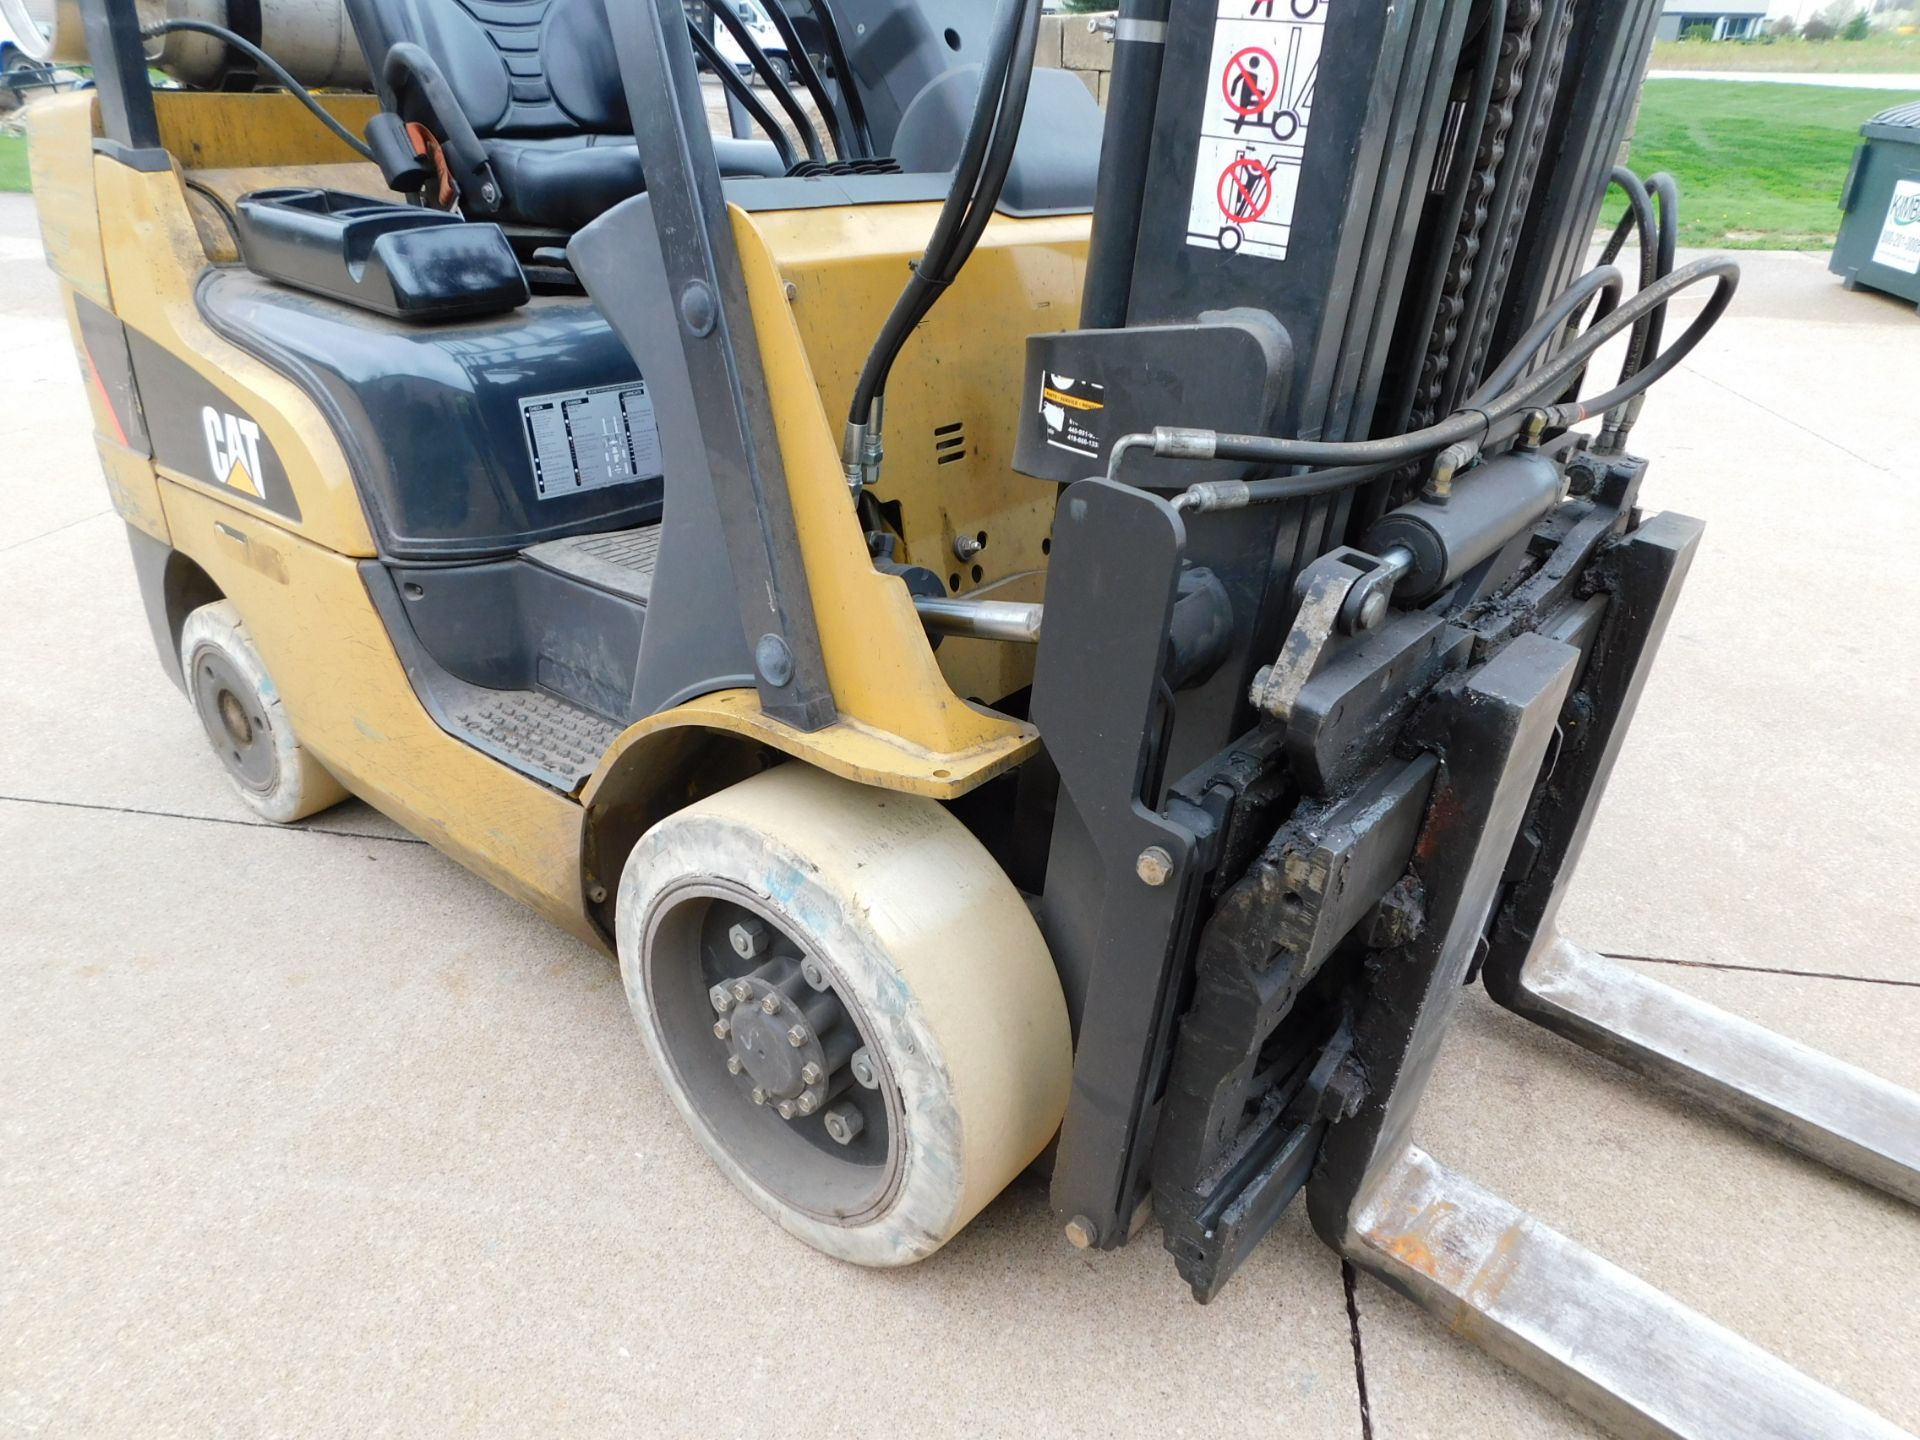 Caterpillar Model 2C6000 Forklift, SN AT83F40876, 4,500 lb cap., LP, Non-Marking Hard Tires, 3-Stage - Image 19 of 21